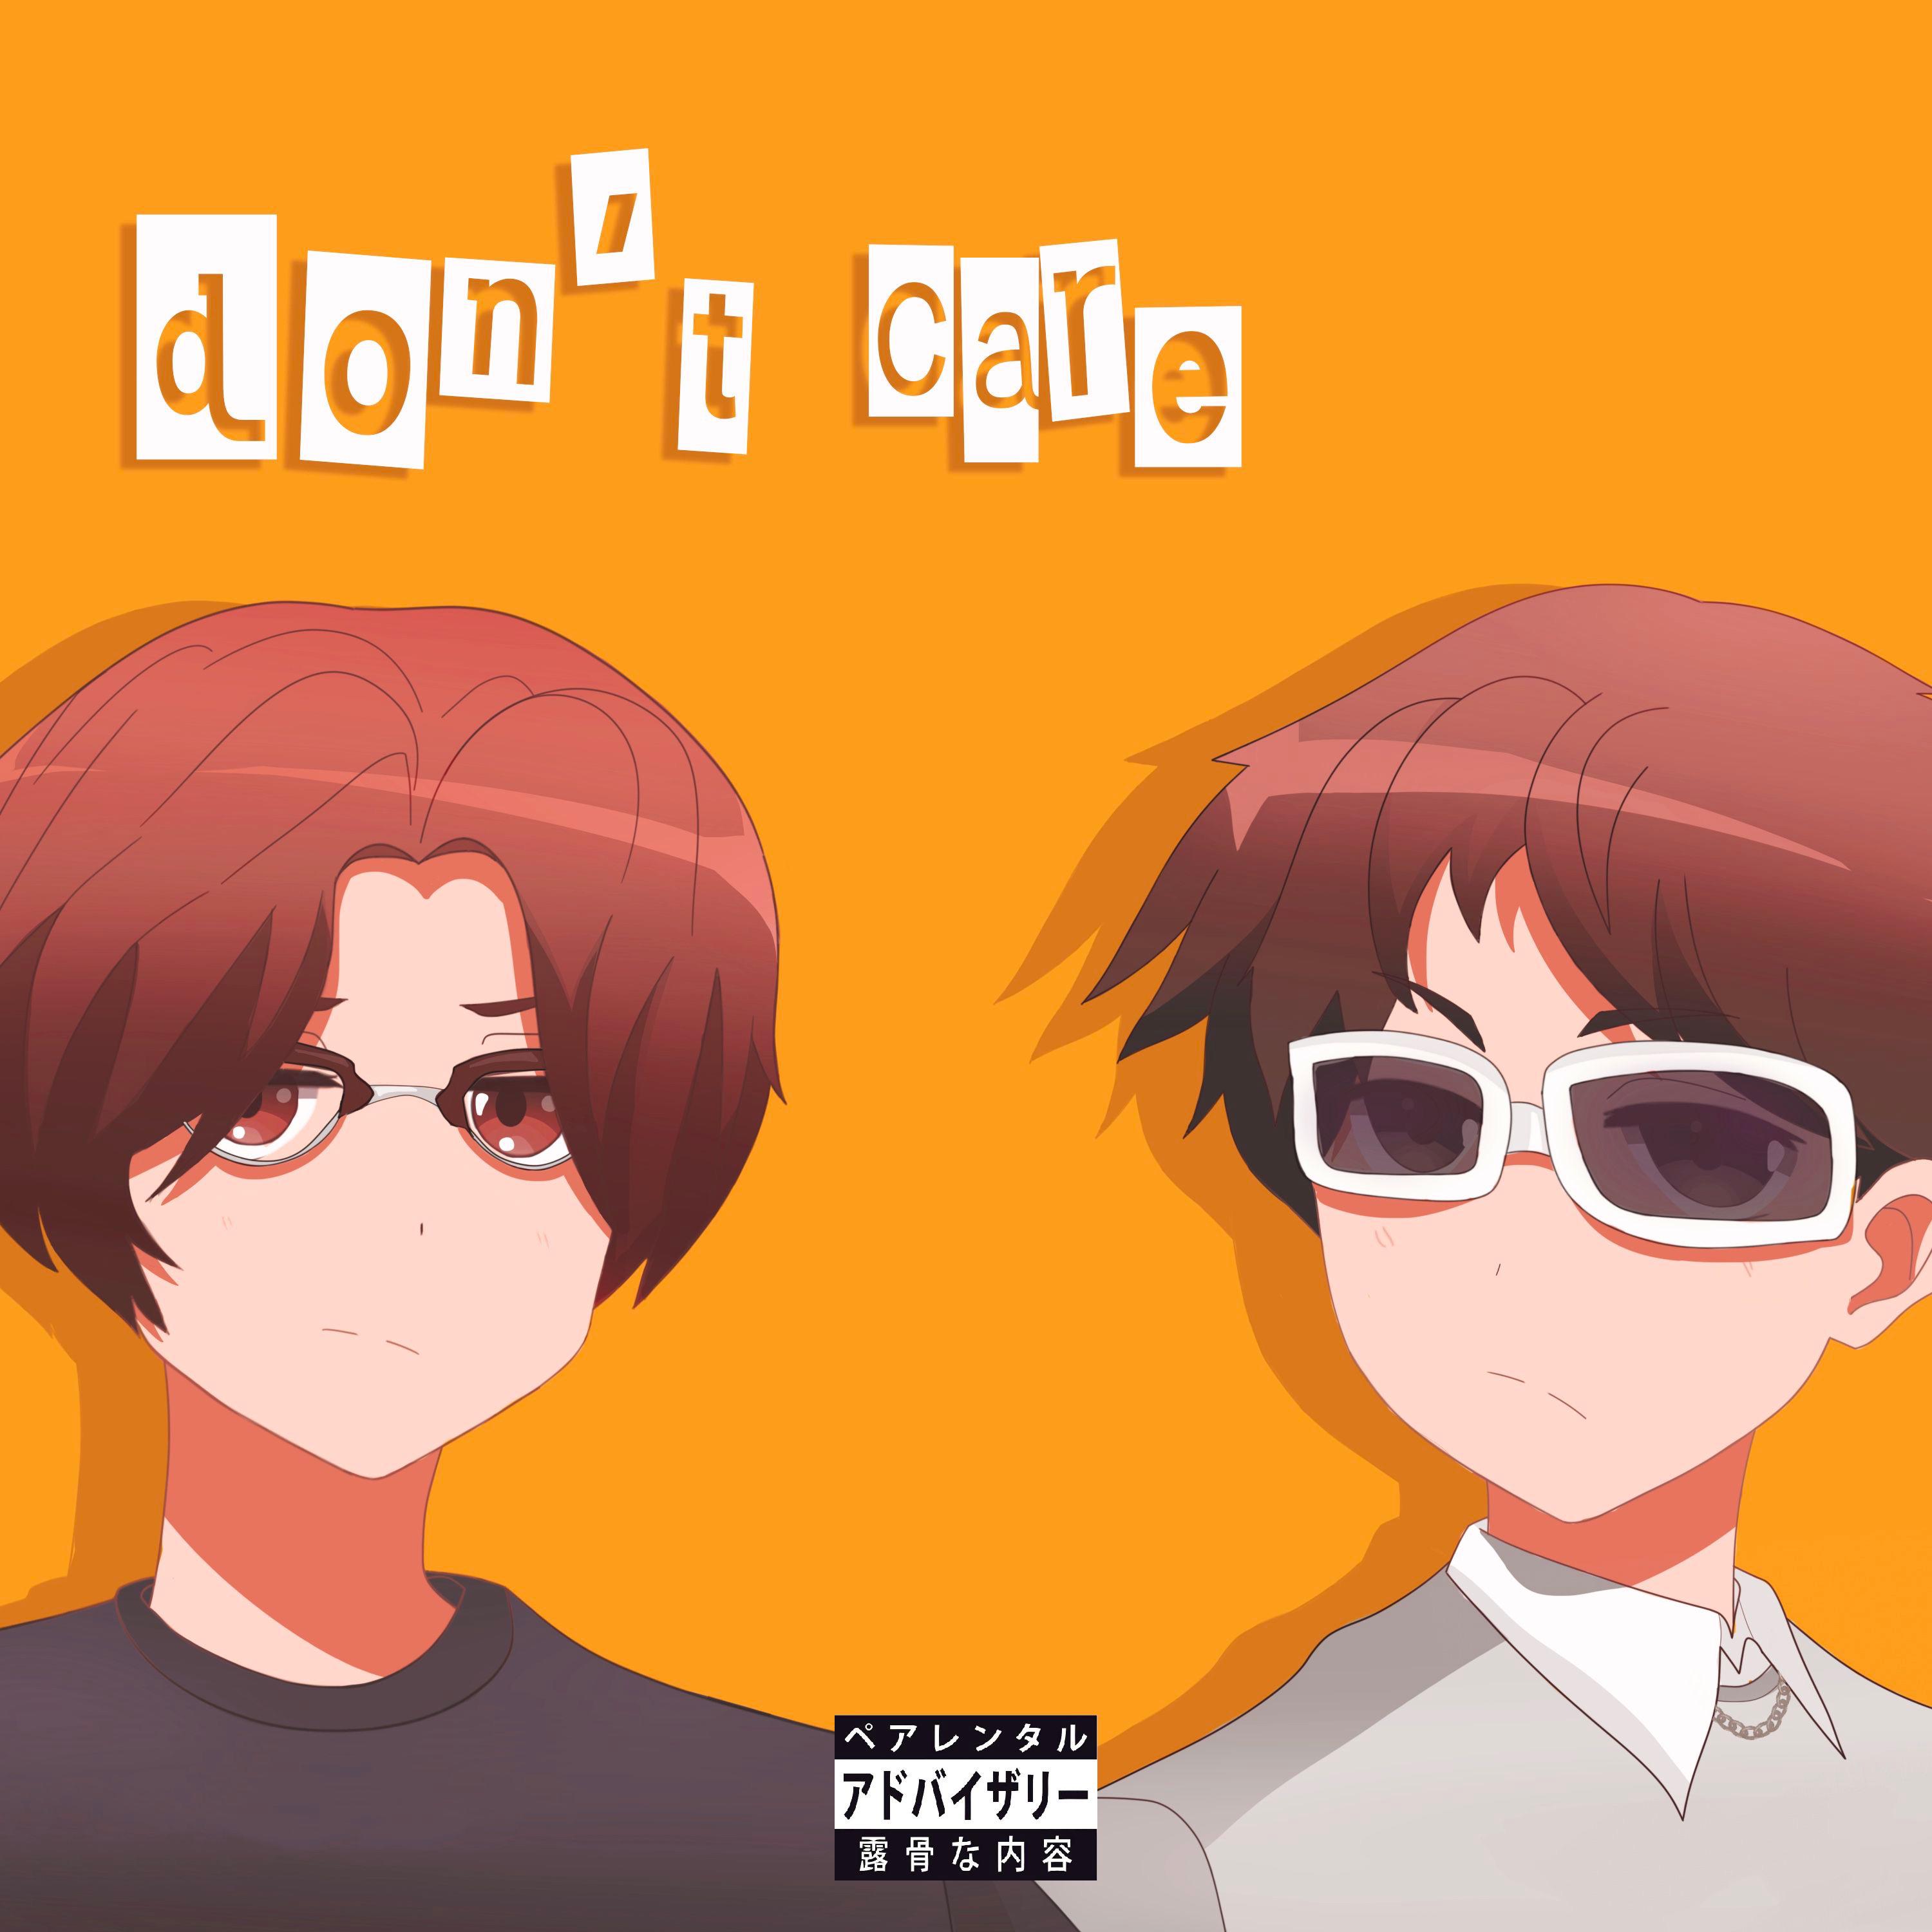 Yung Clutz - don't care